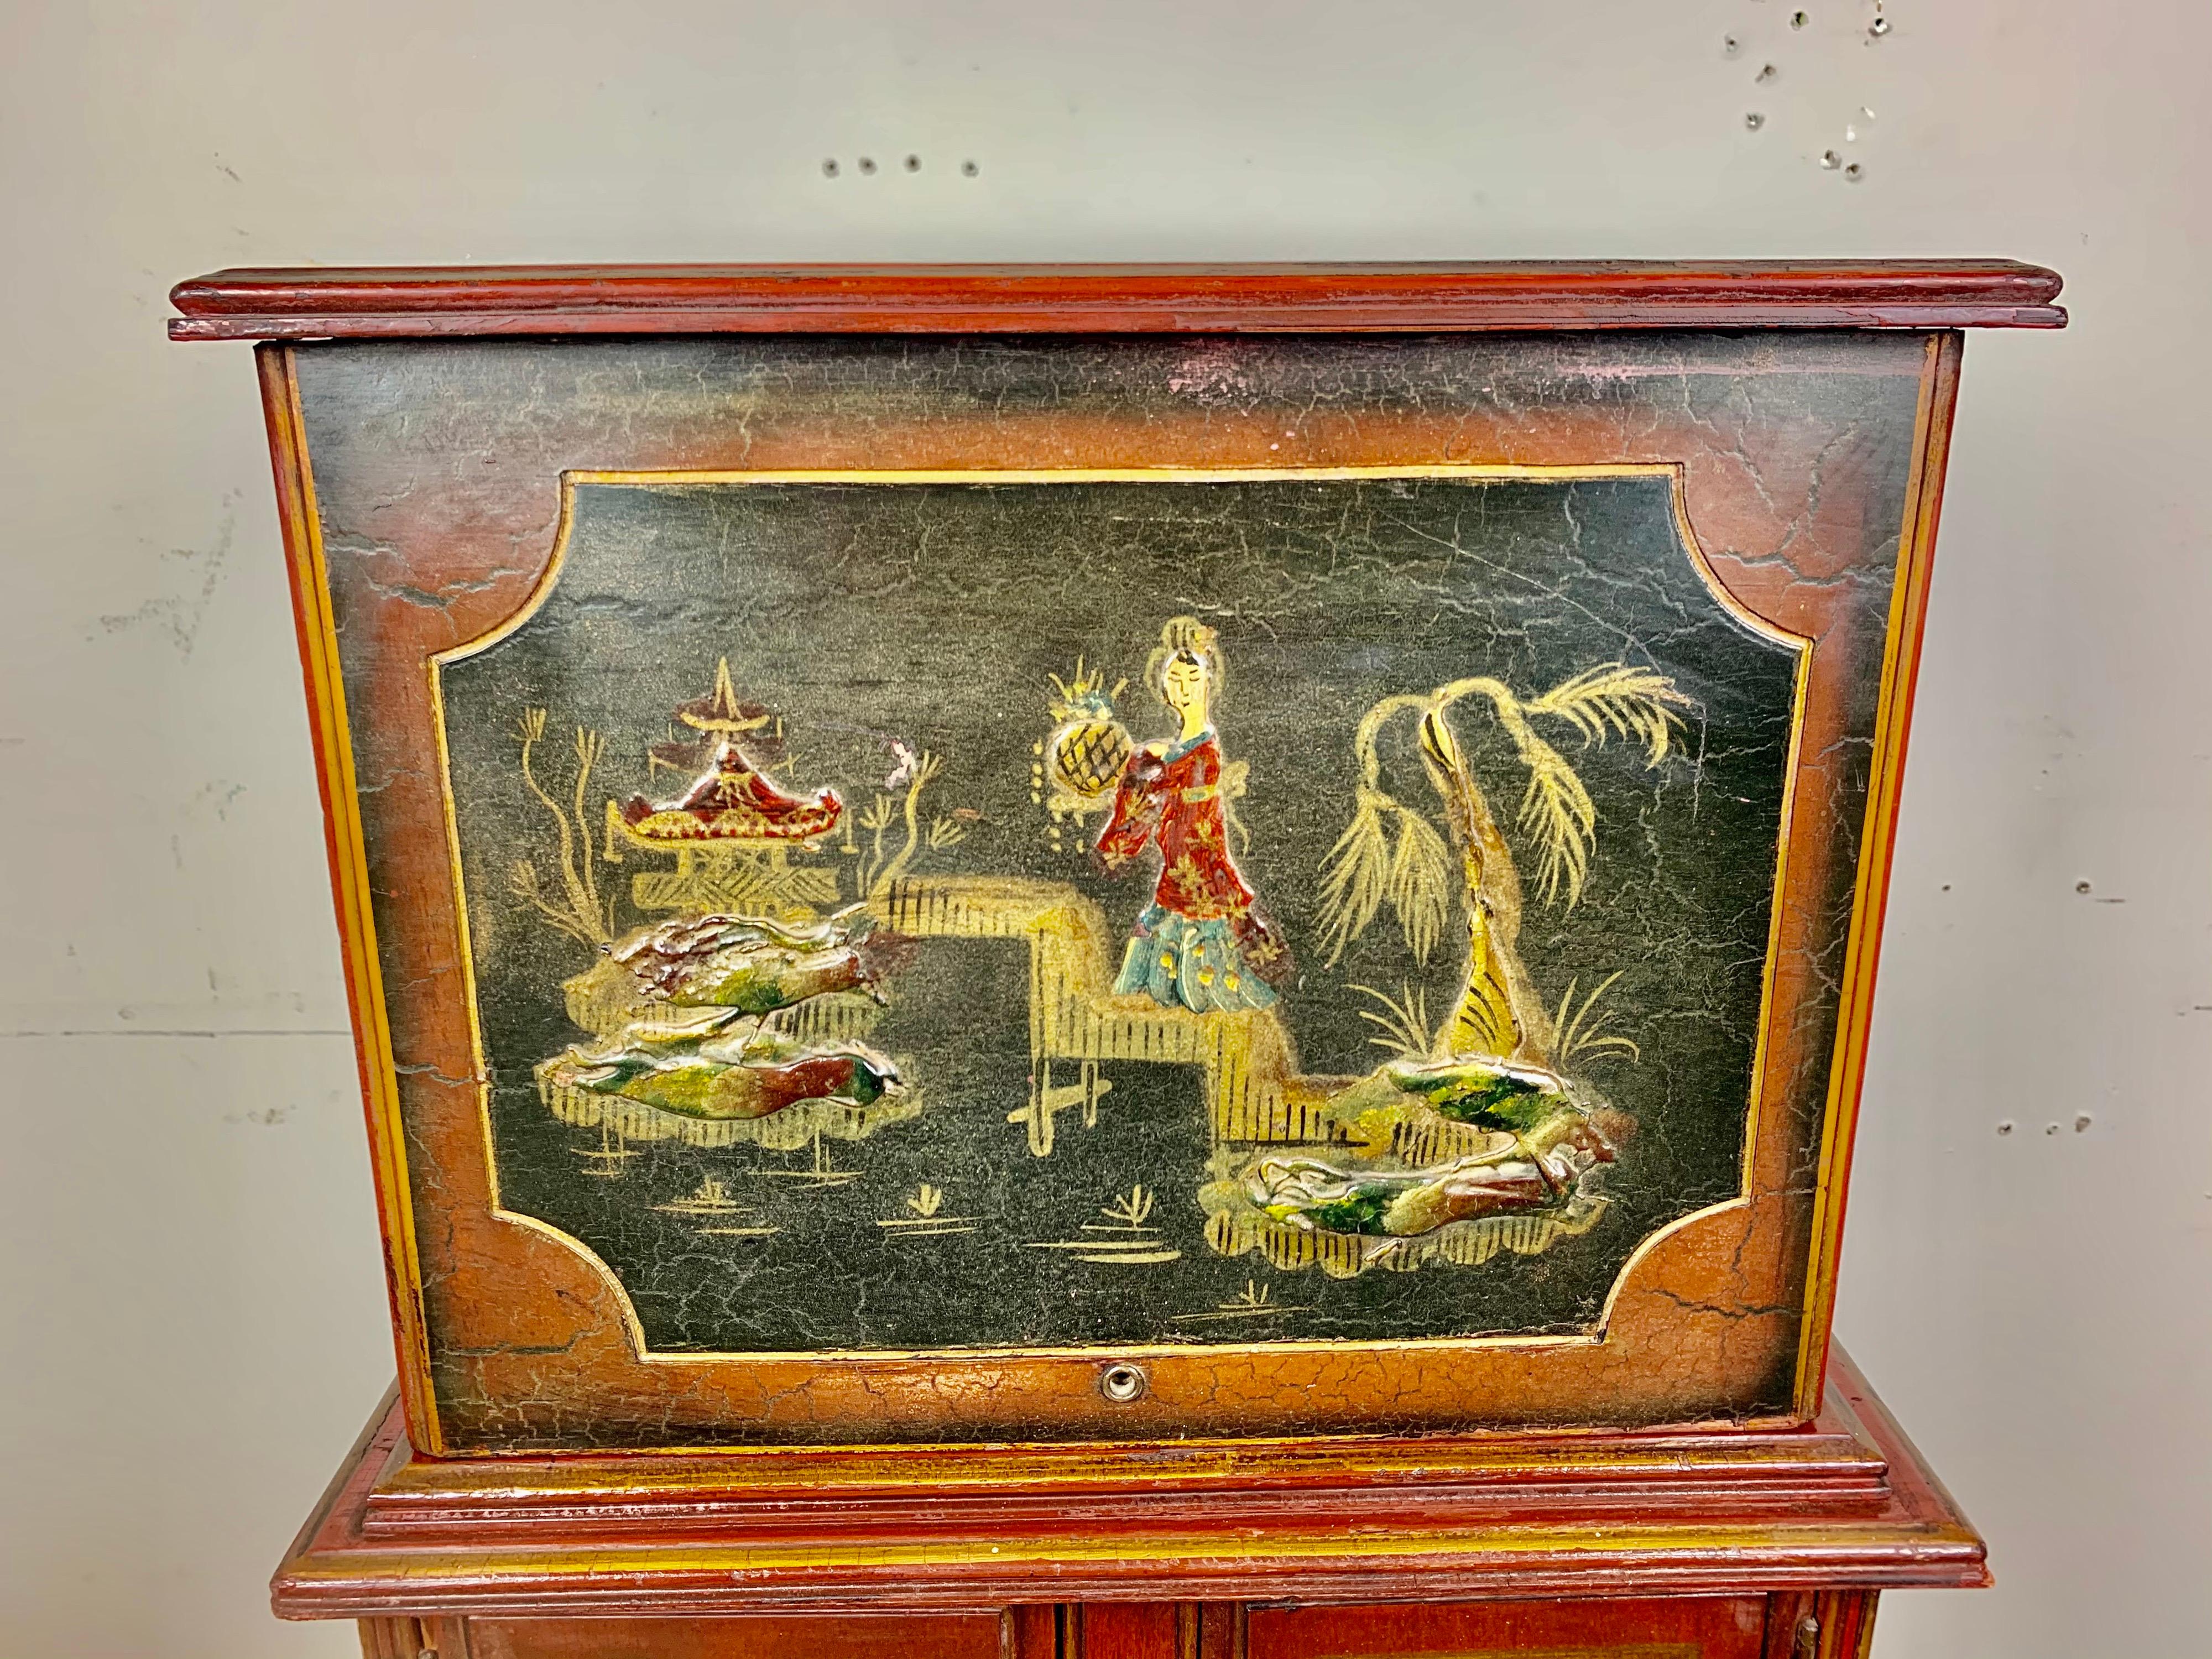 Hand painted English chinoiserie painted smoking cabinet, circa 1930s. Beautiful chinoiserie decoration including figures, pagodas, bridges, and so much more.